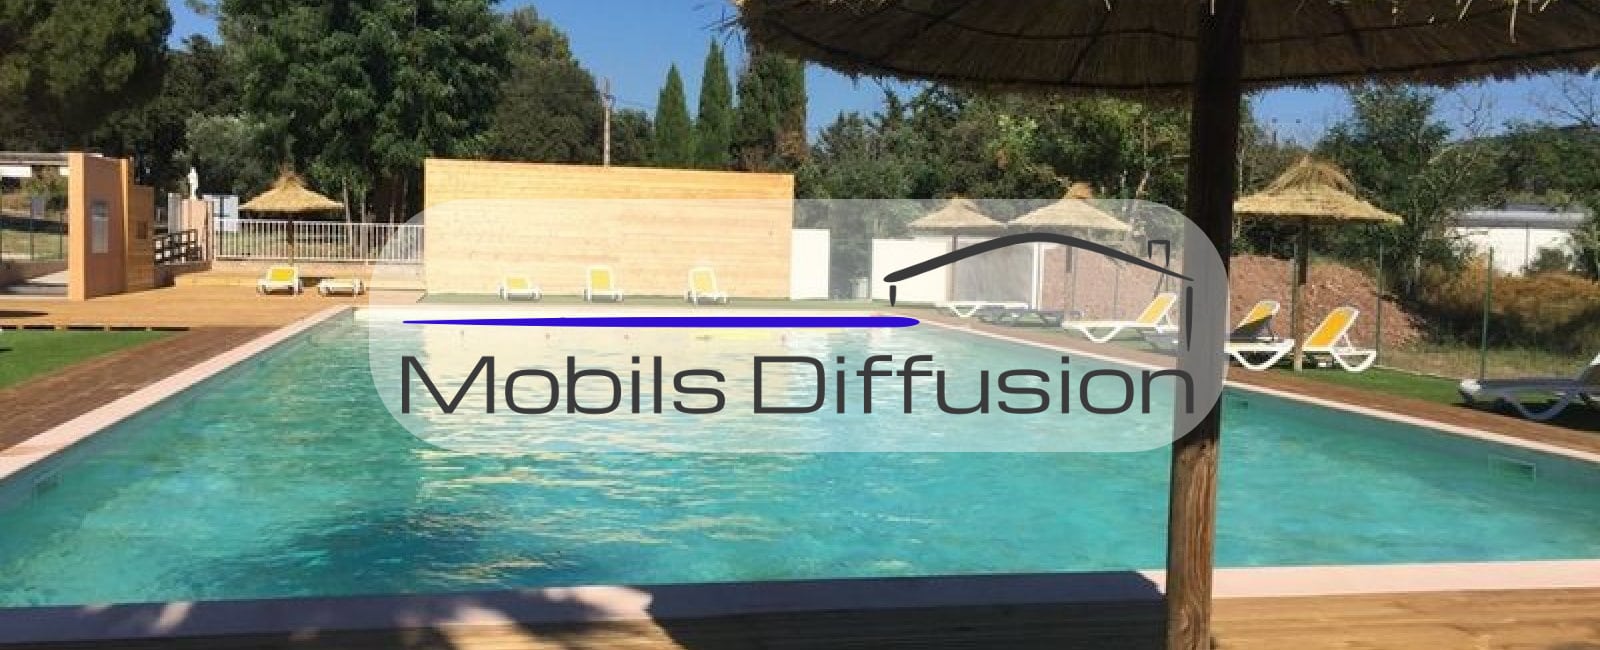 Mobils Diffusion - Pitch for mobile home in a superb campsite in the Var